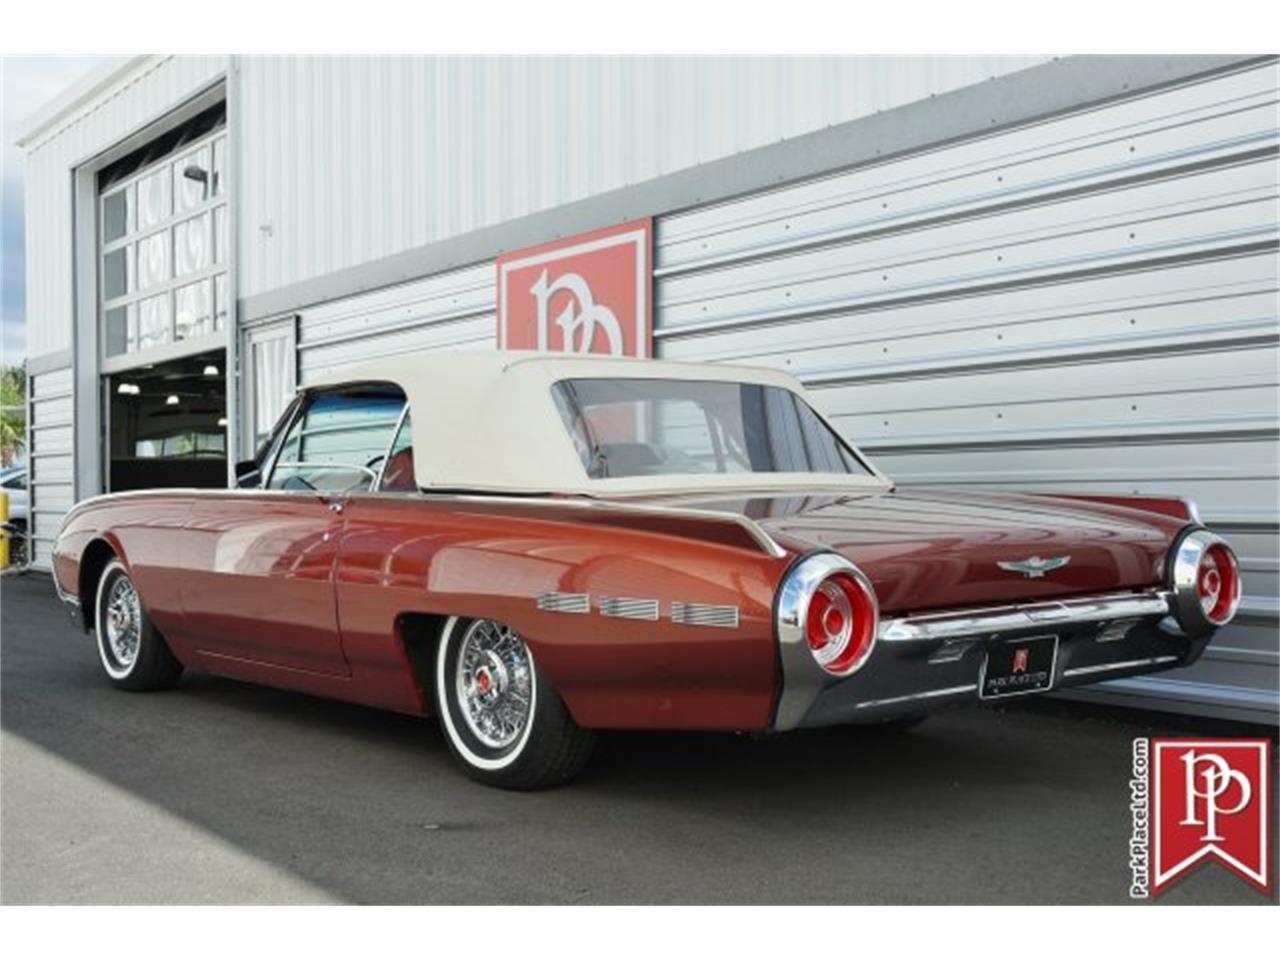 1962 ford thunderbird for sale cyberduck co